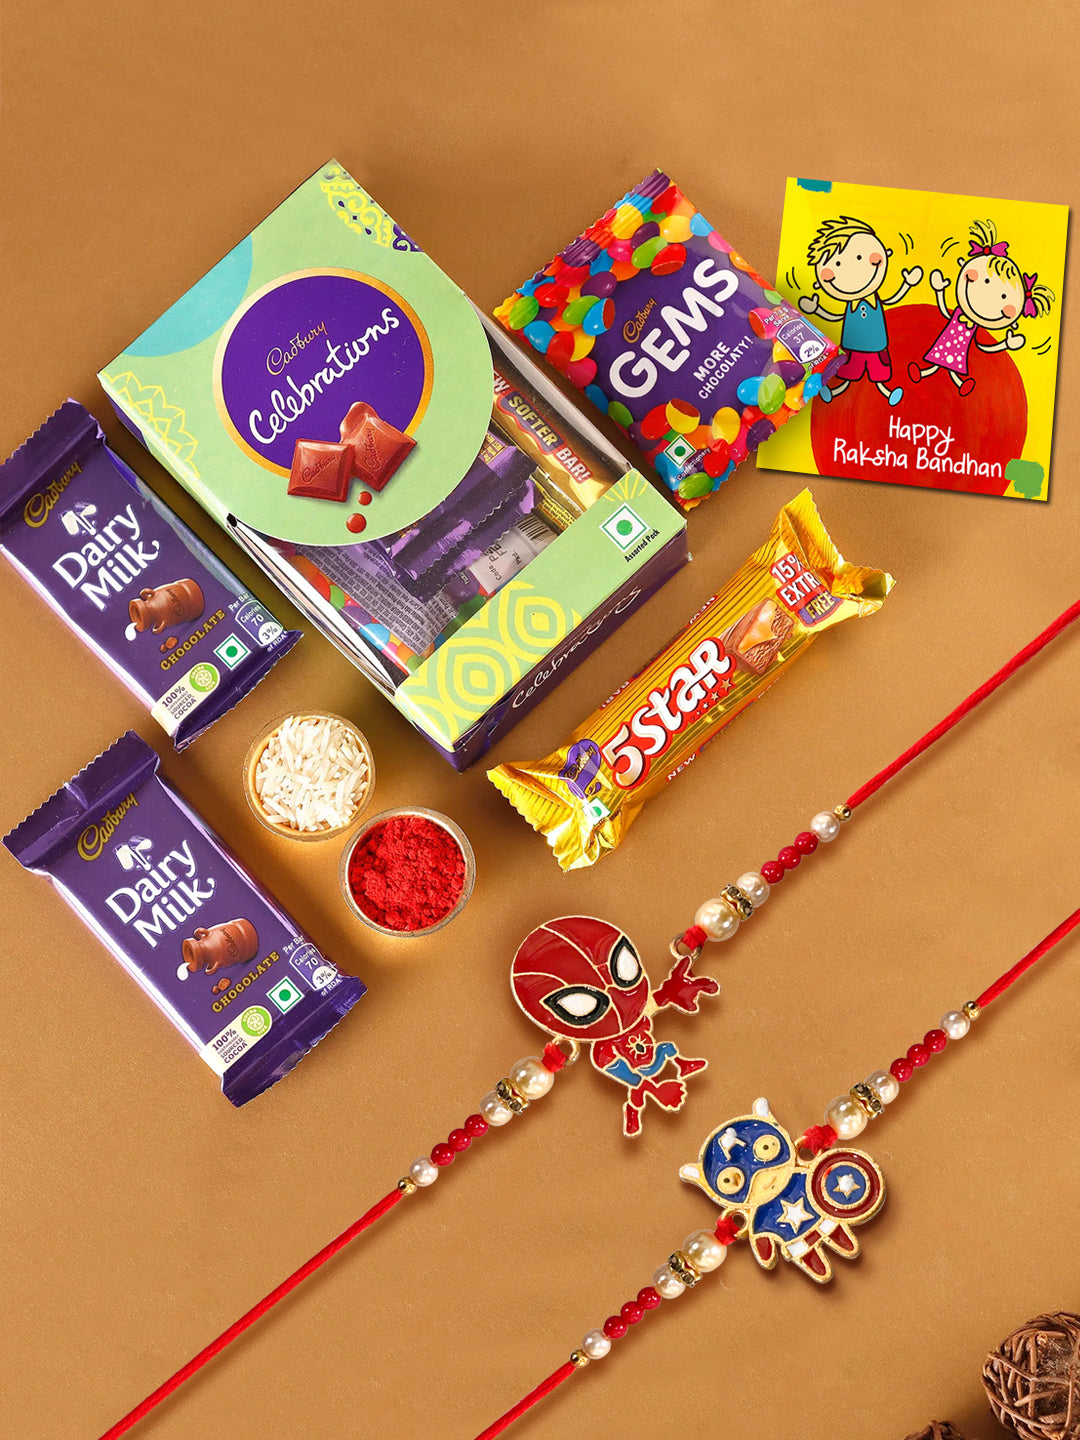 The Click India Rakhi Gifts for Kids with Chocolate | Rakhi Mug With  Chocolate| Raksha Bandhan Gifts For Kids/Baby Brother/Nephew/Bhaiya/Boys /Girls-Rakhi Chocolate Combo (krmc old hanu) : Amazon.in: Grocery & Gourmet  Foods